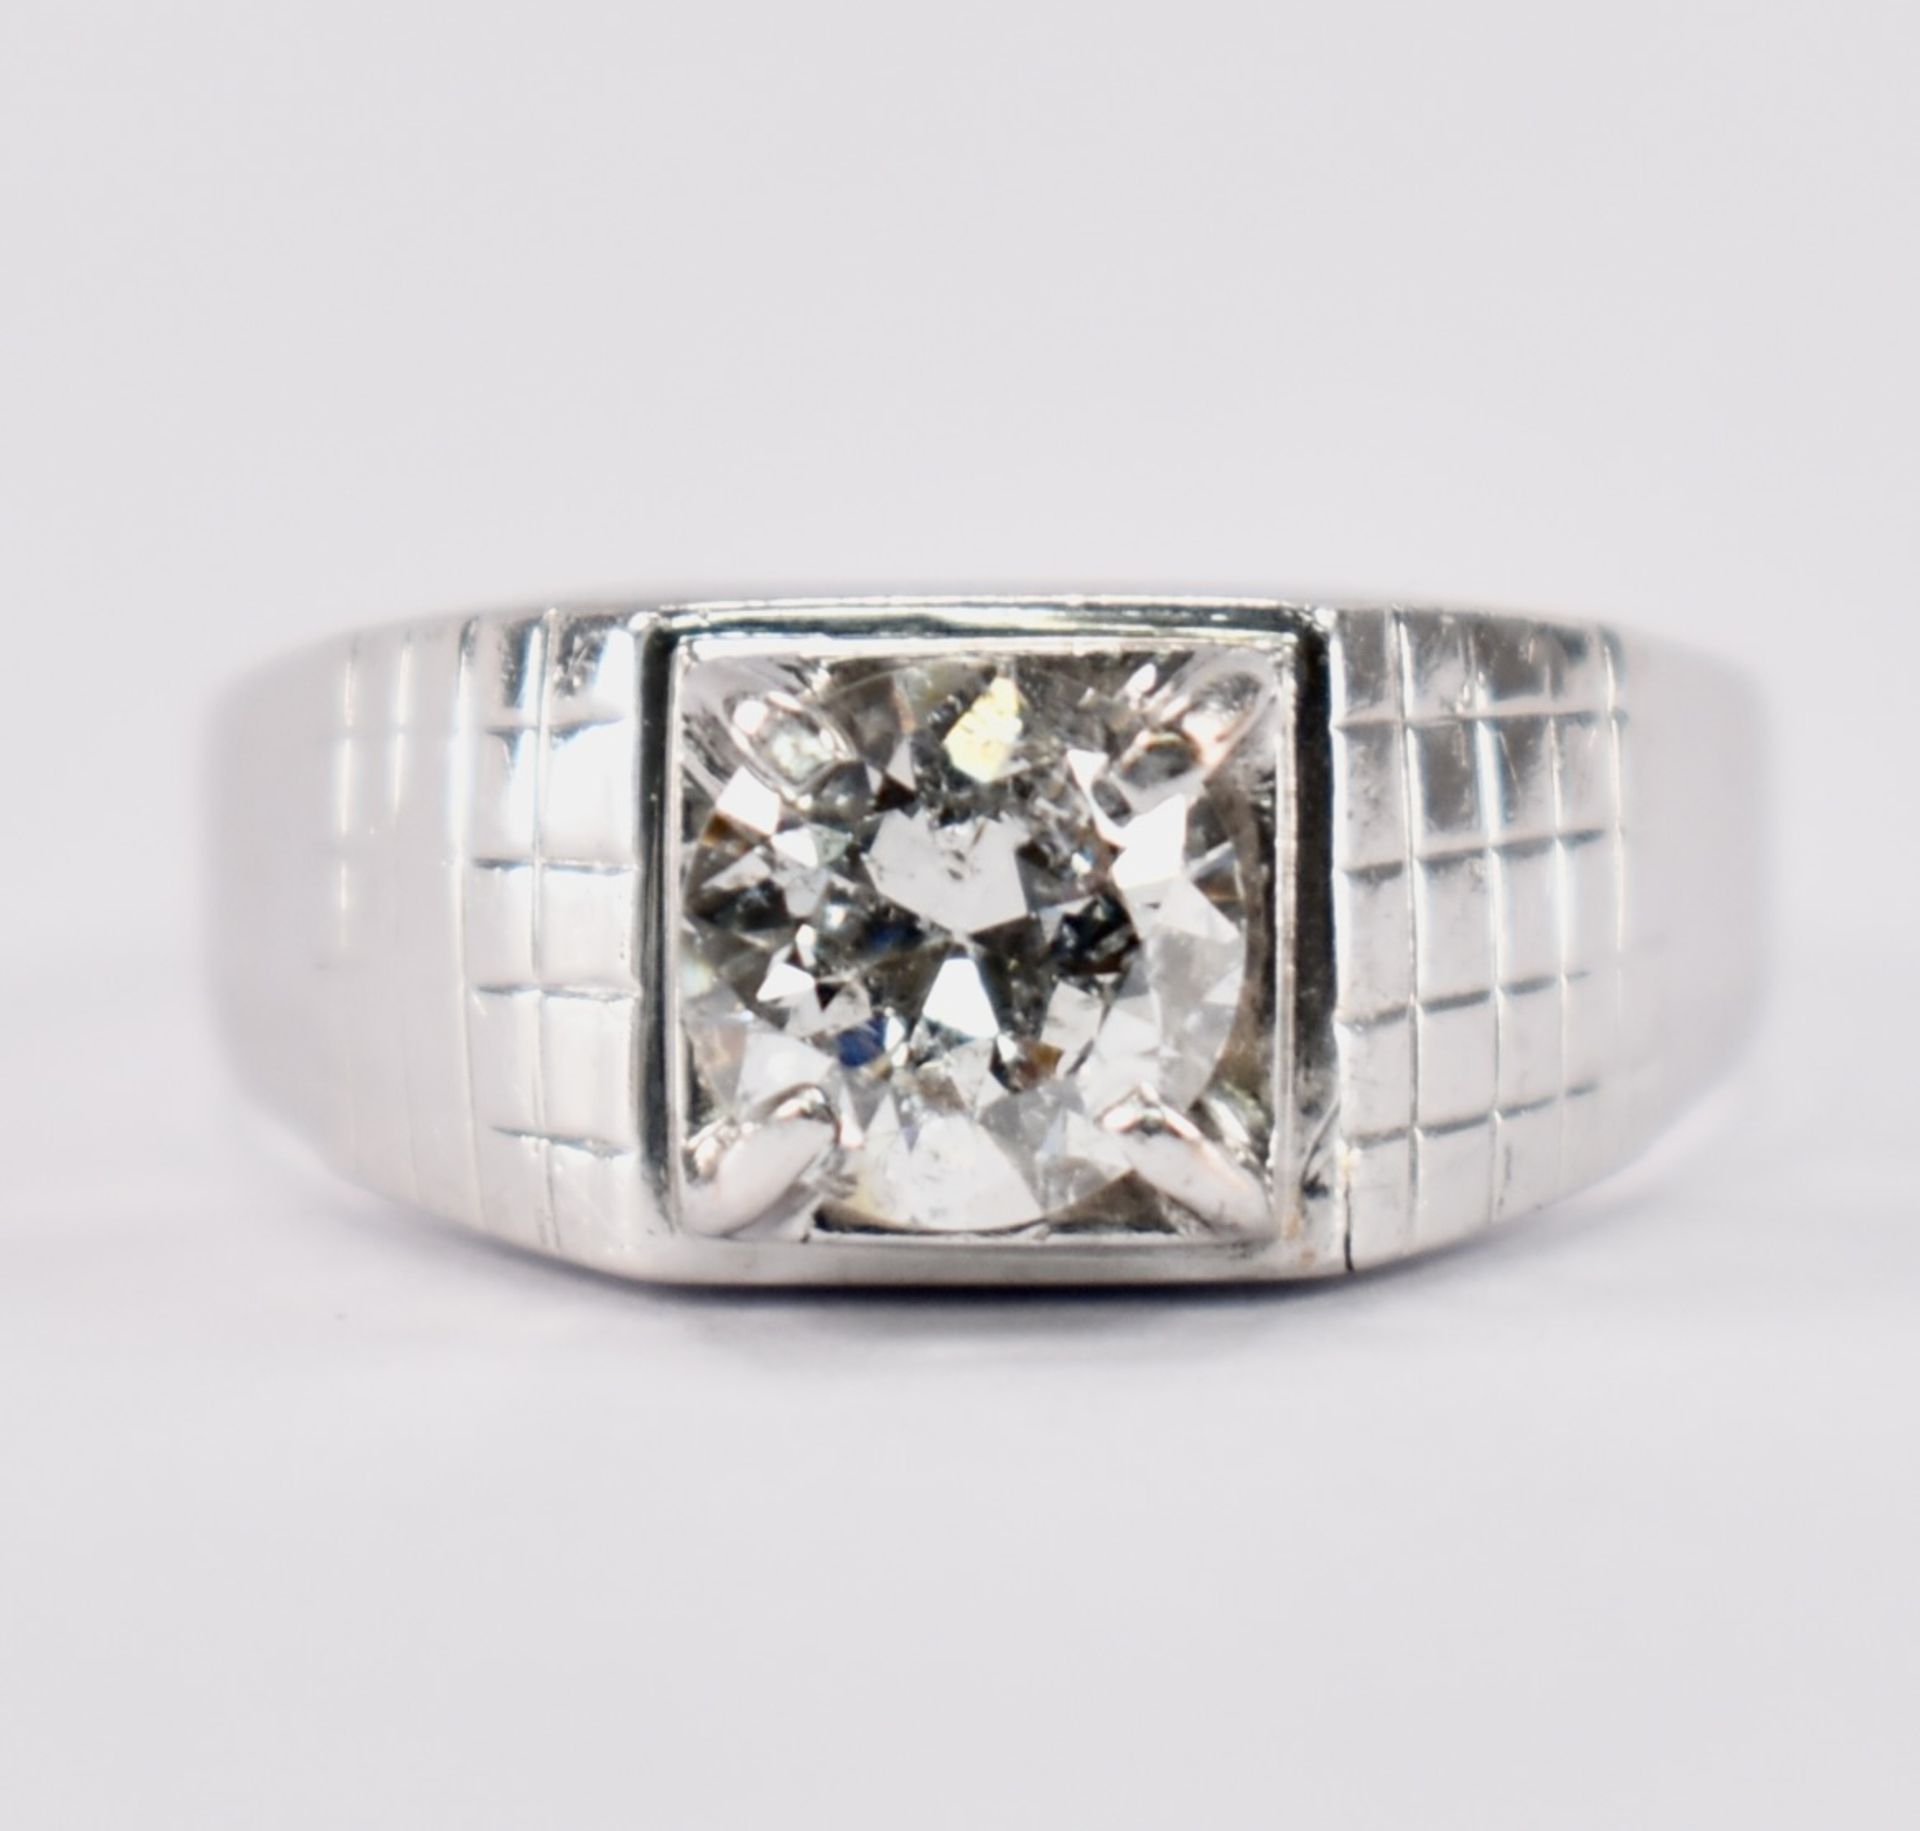 1940s ART DECO WHITE GOLD & DIAMOND SOLITAIRE RING 1.14CT - Image 8 of 9